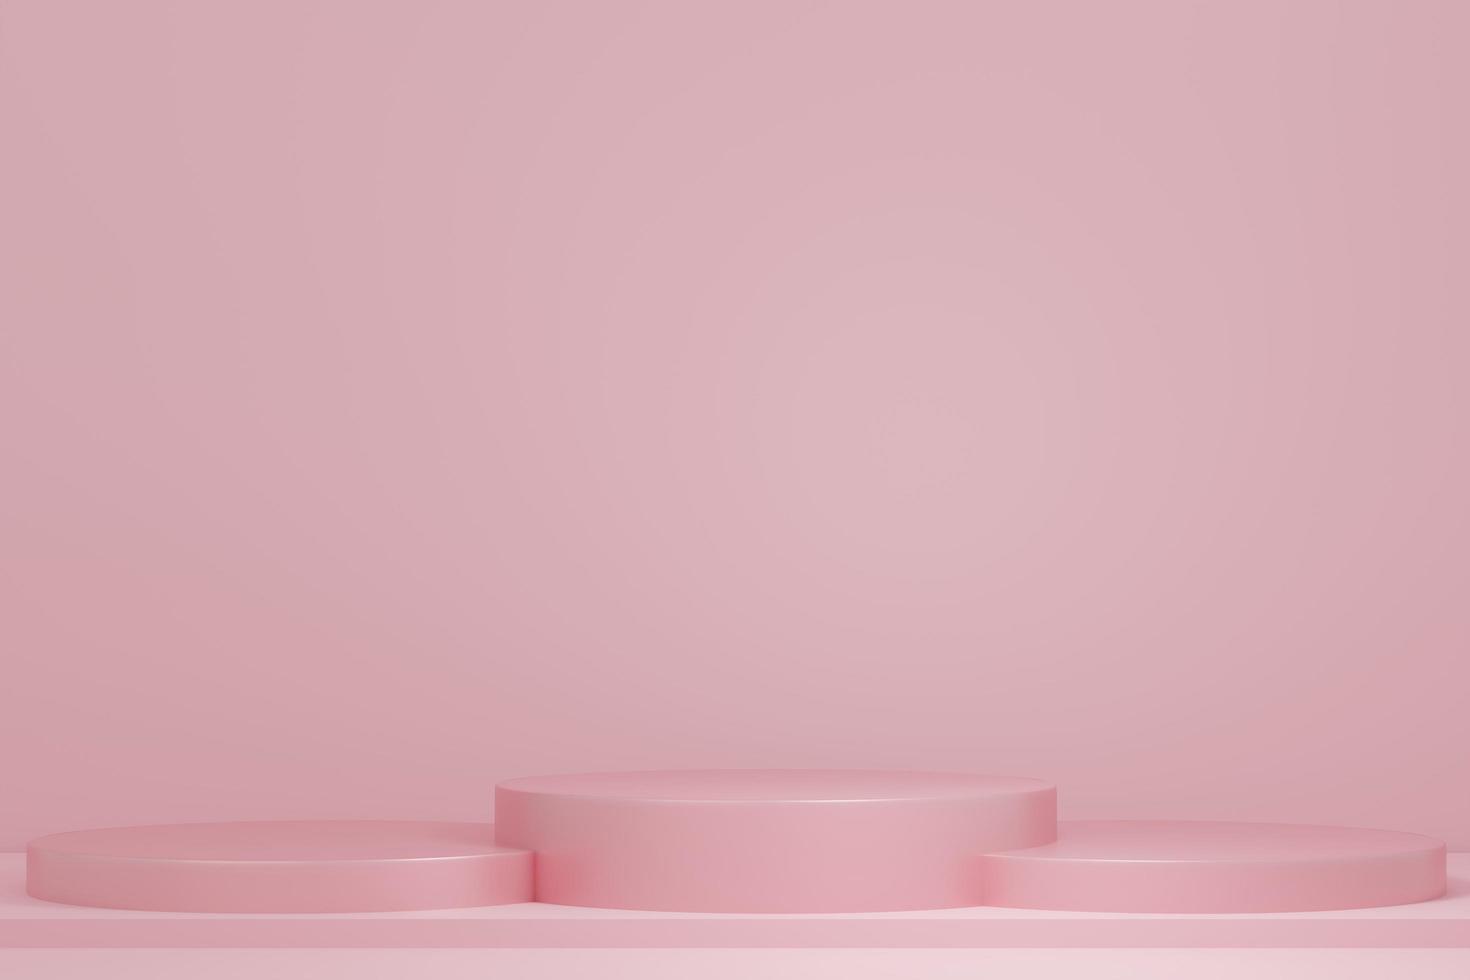 Soft pink 3D illustration with geometric steps  photo